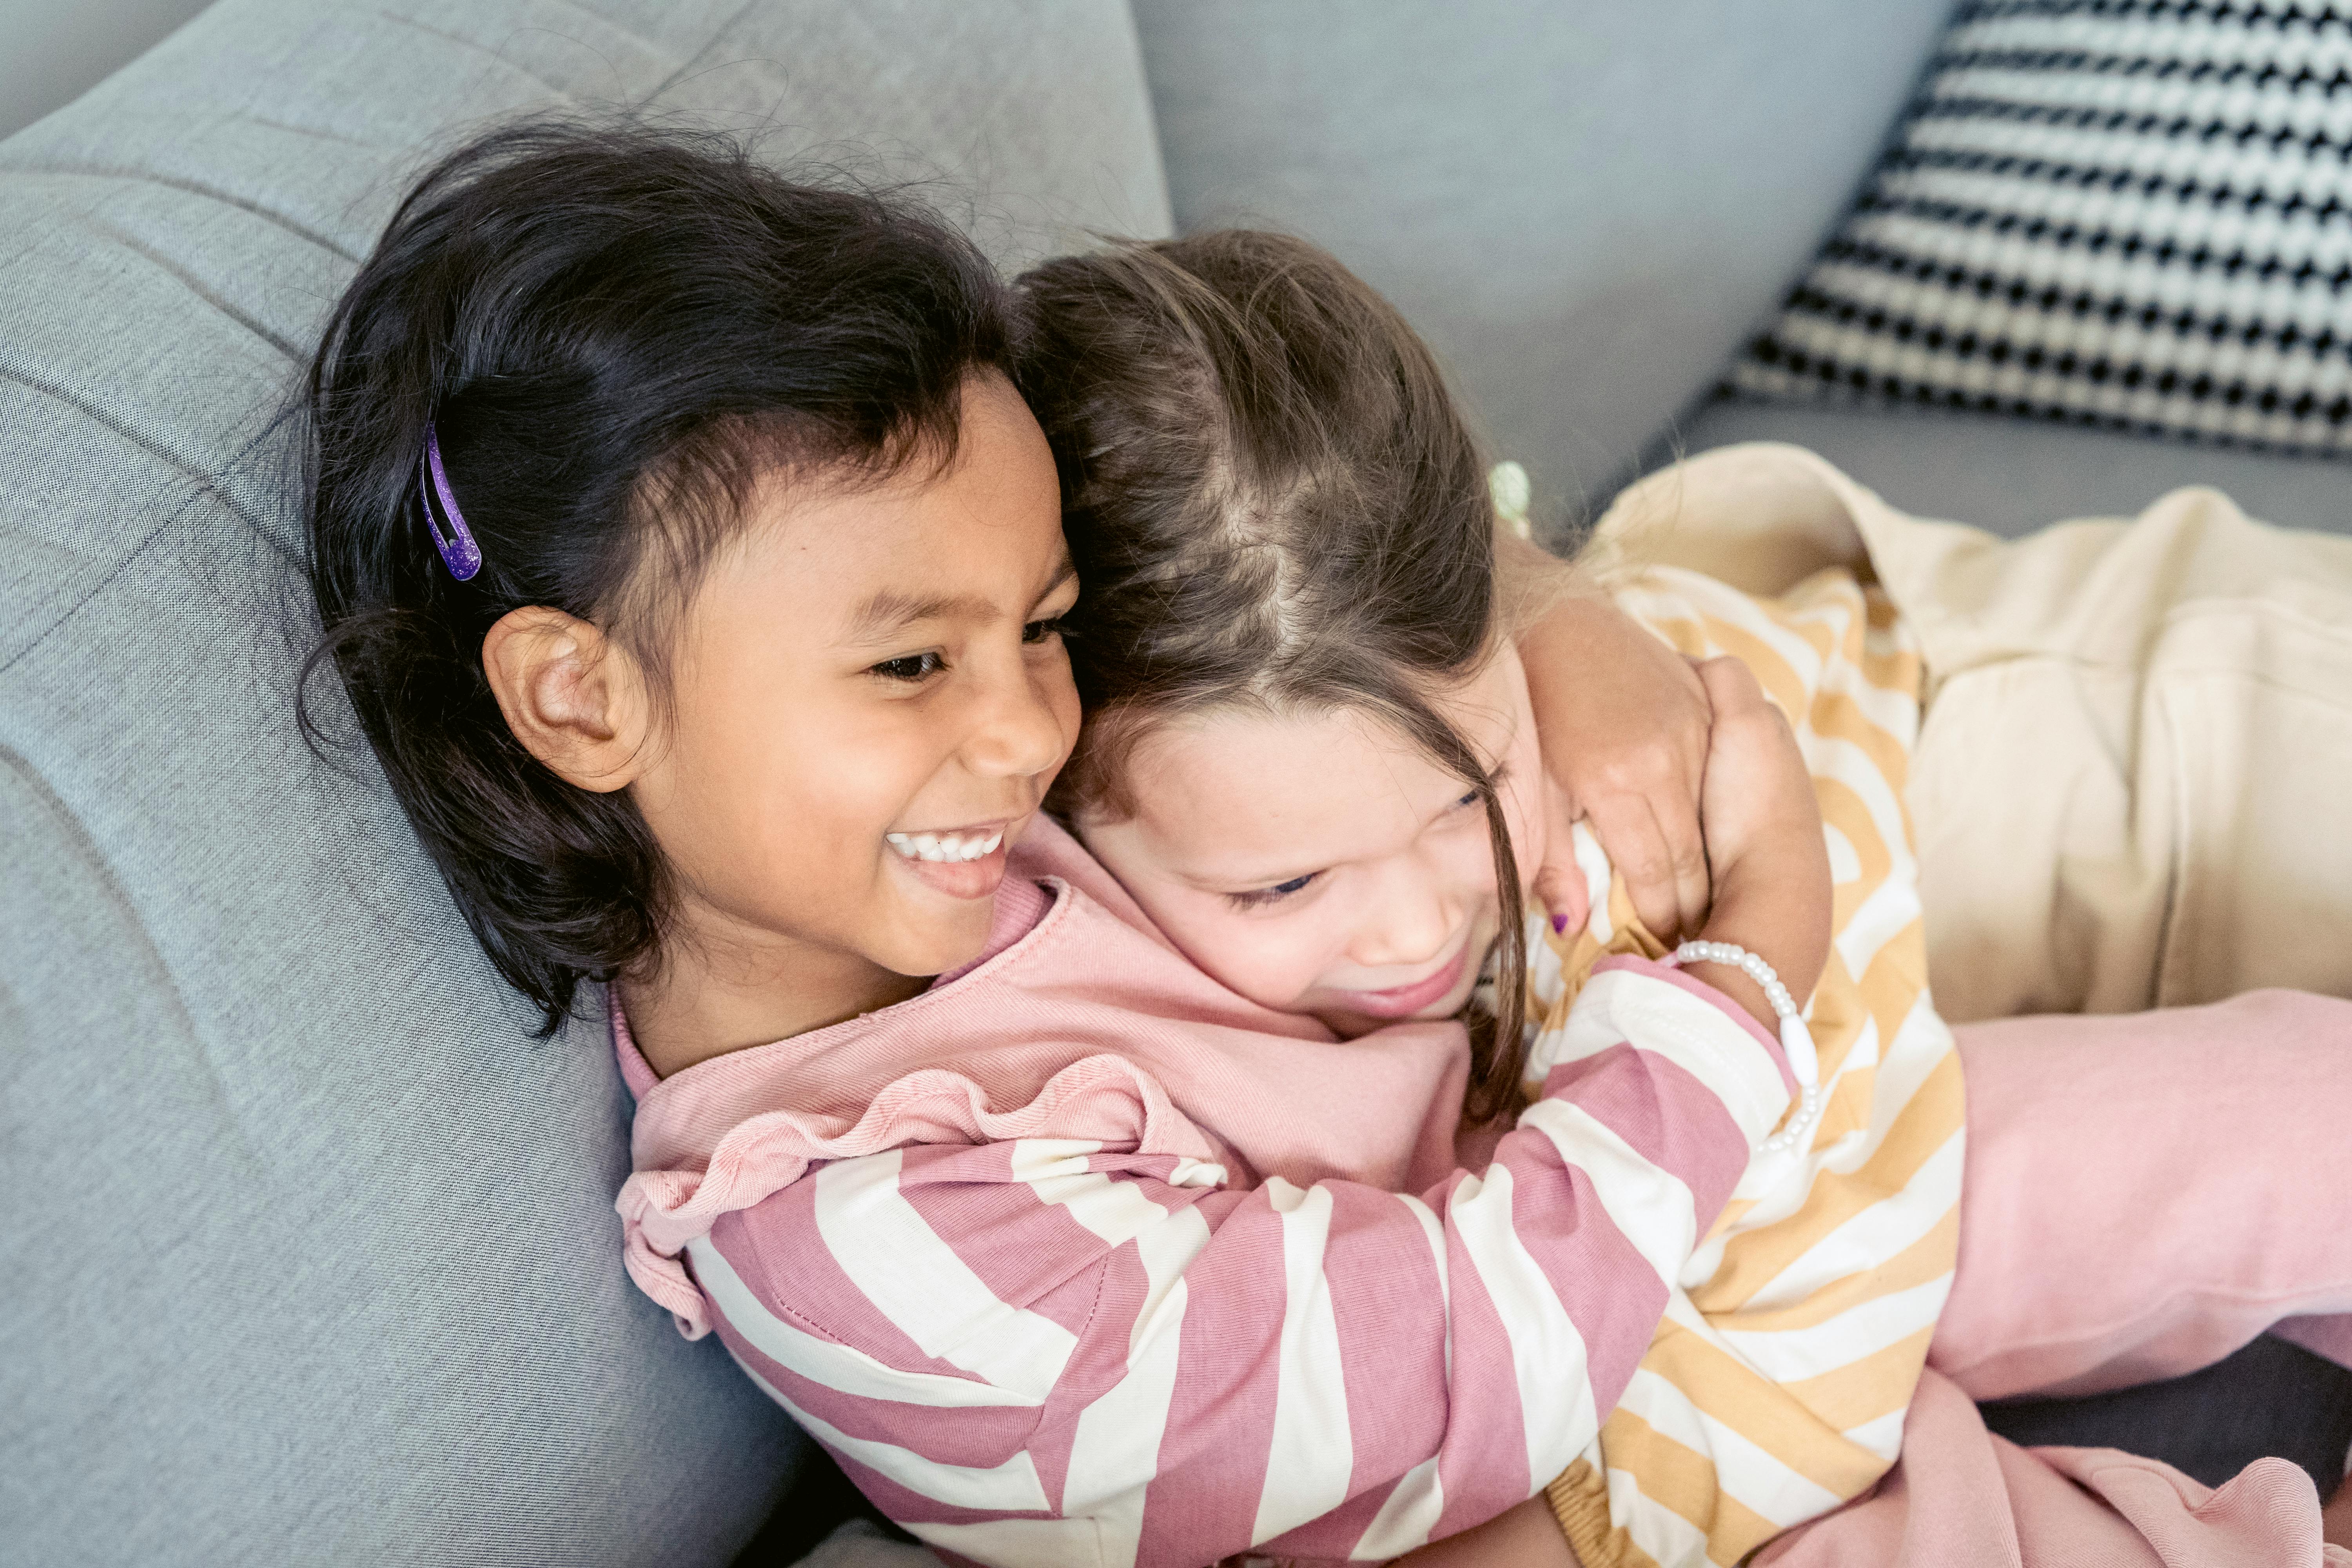 cute diverse girls hugging tenderly on couch